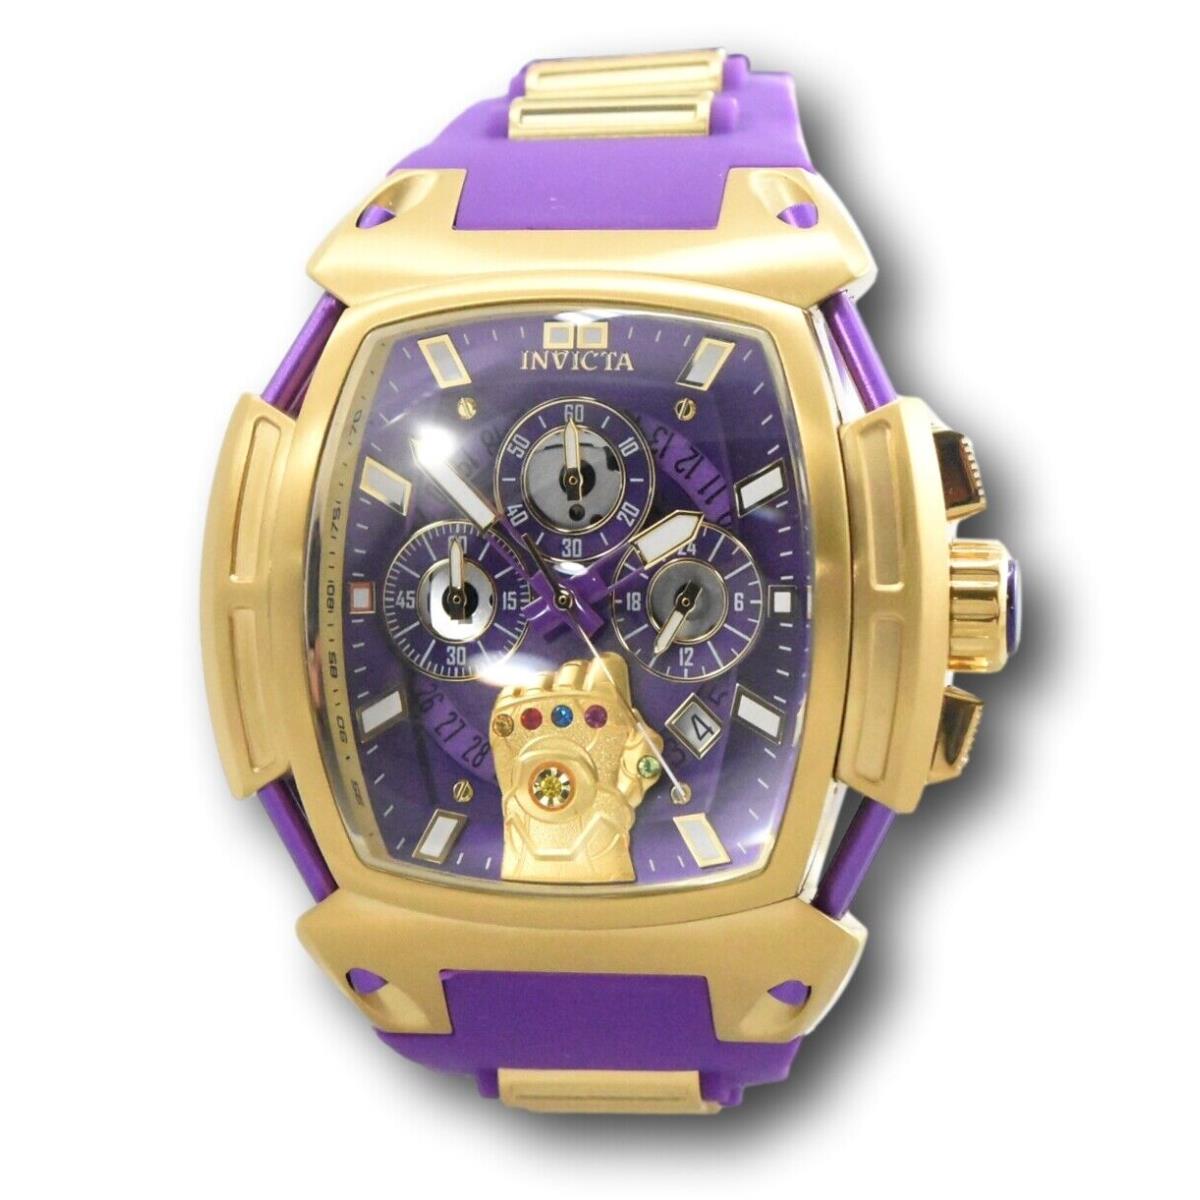 Invicta Marvel Thanos Infinity Gauntlet Men`s 53mm Limited Ed Chrono Watch 37390 - Dial: Gold, Multicolor, Purple, Band: Purple, Bezel: Gold, Yellow